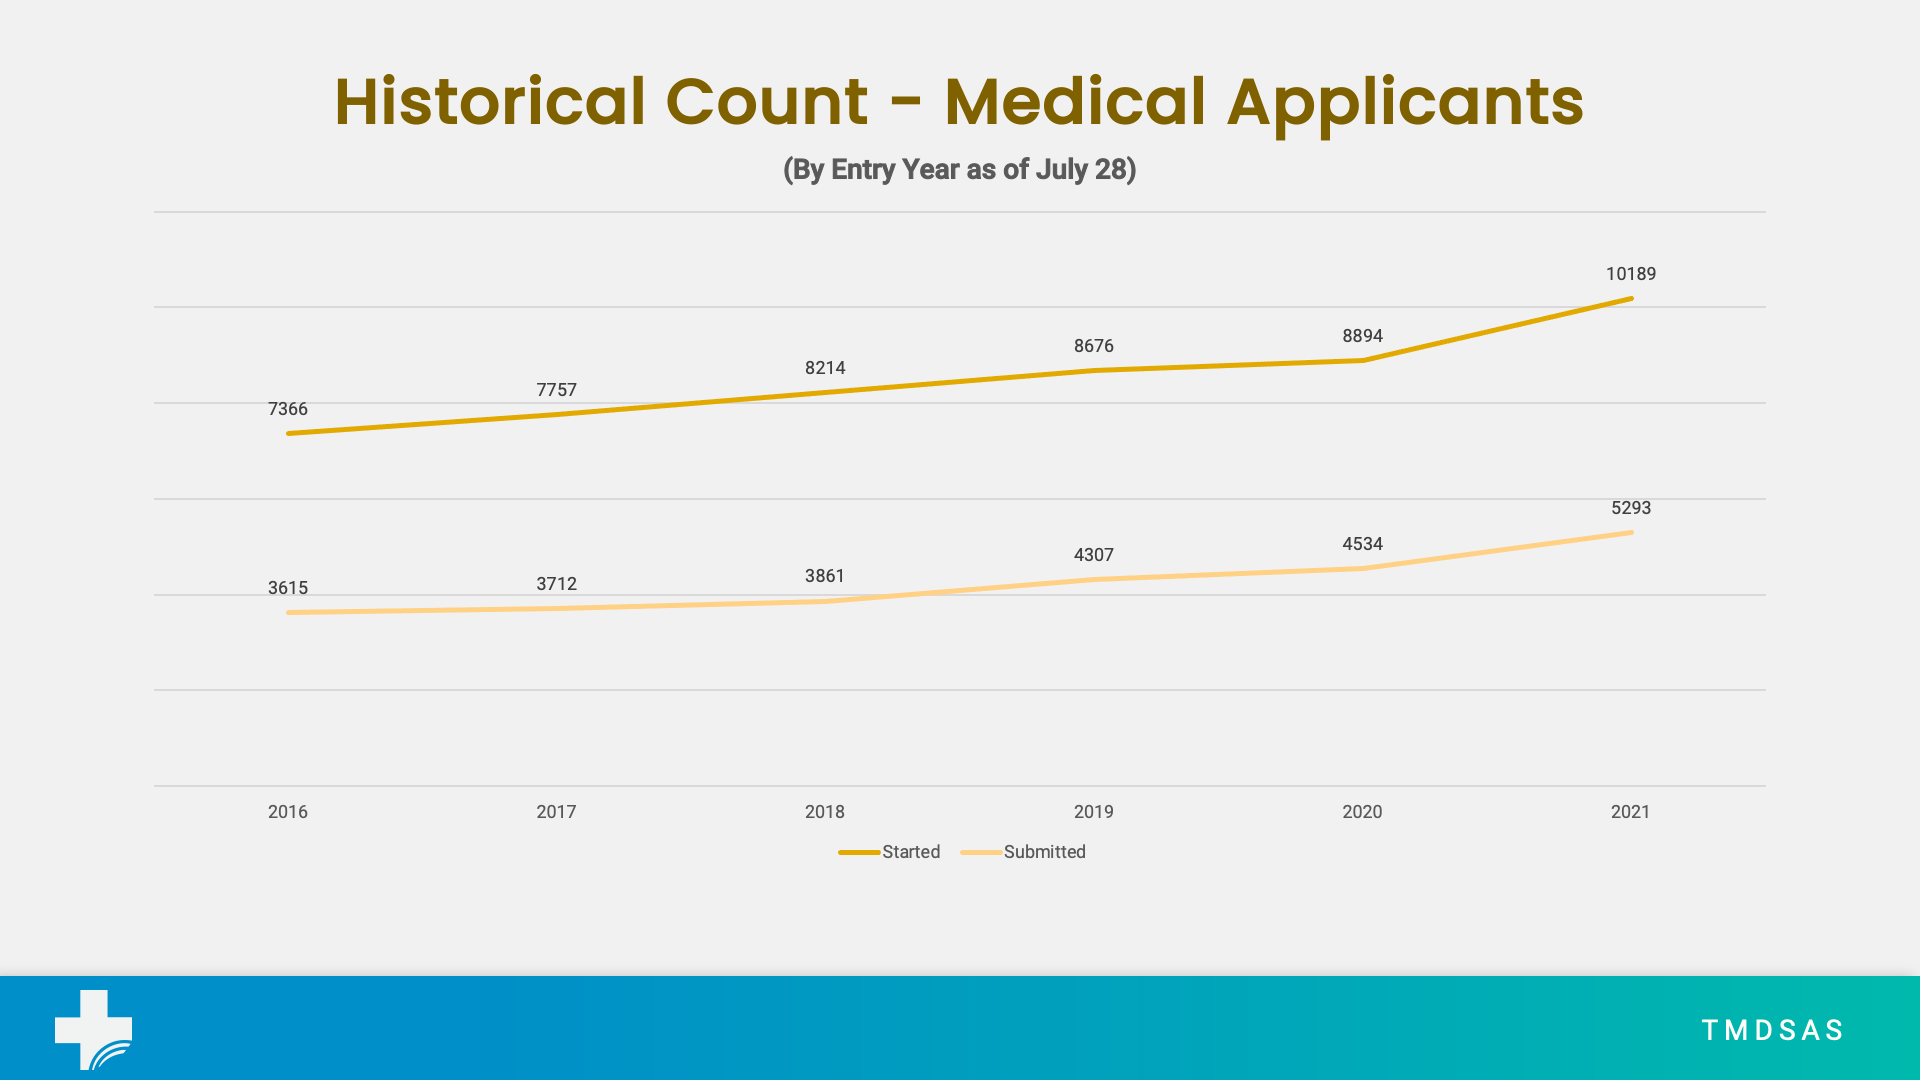 EY21 Medical Applications as of June 15, 2020